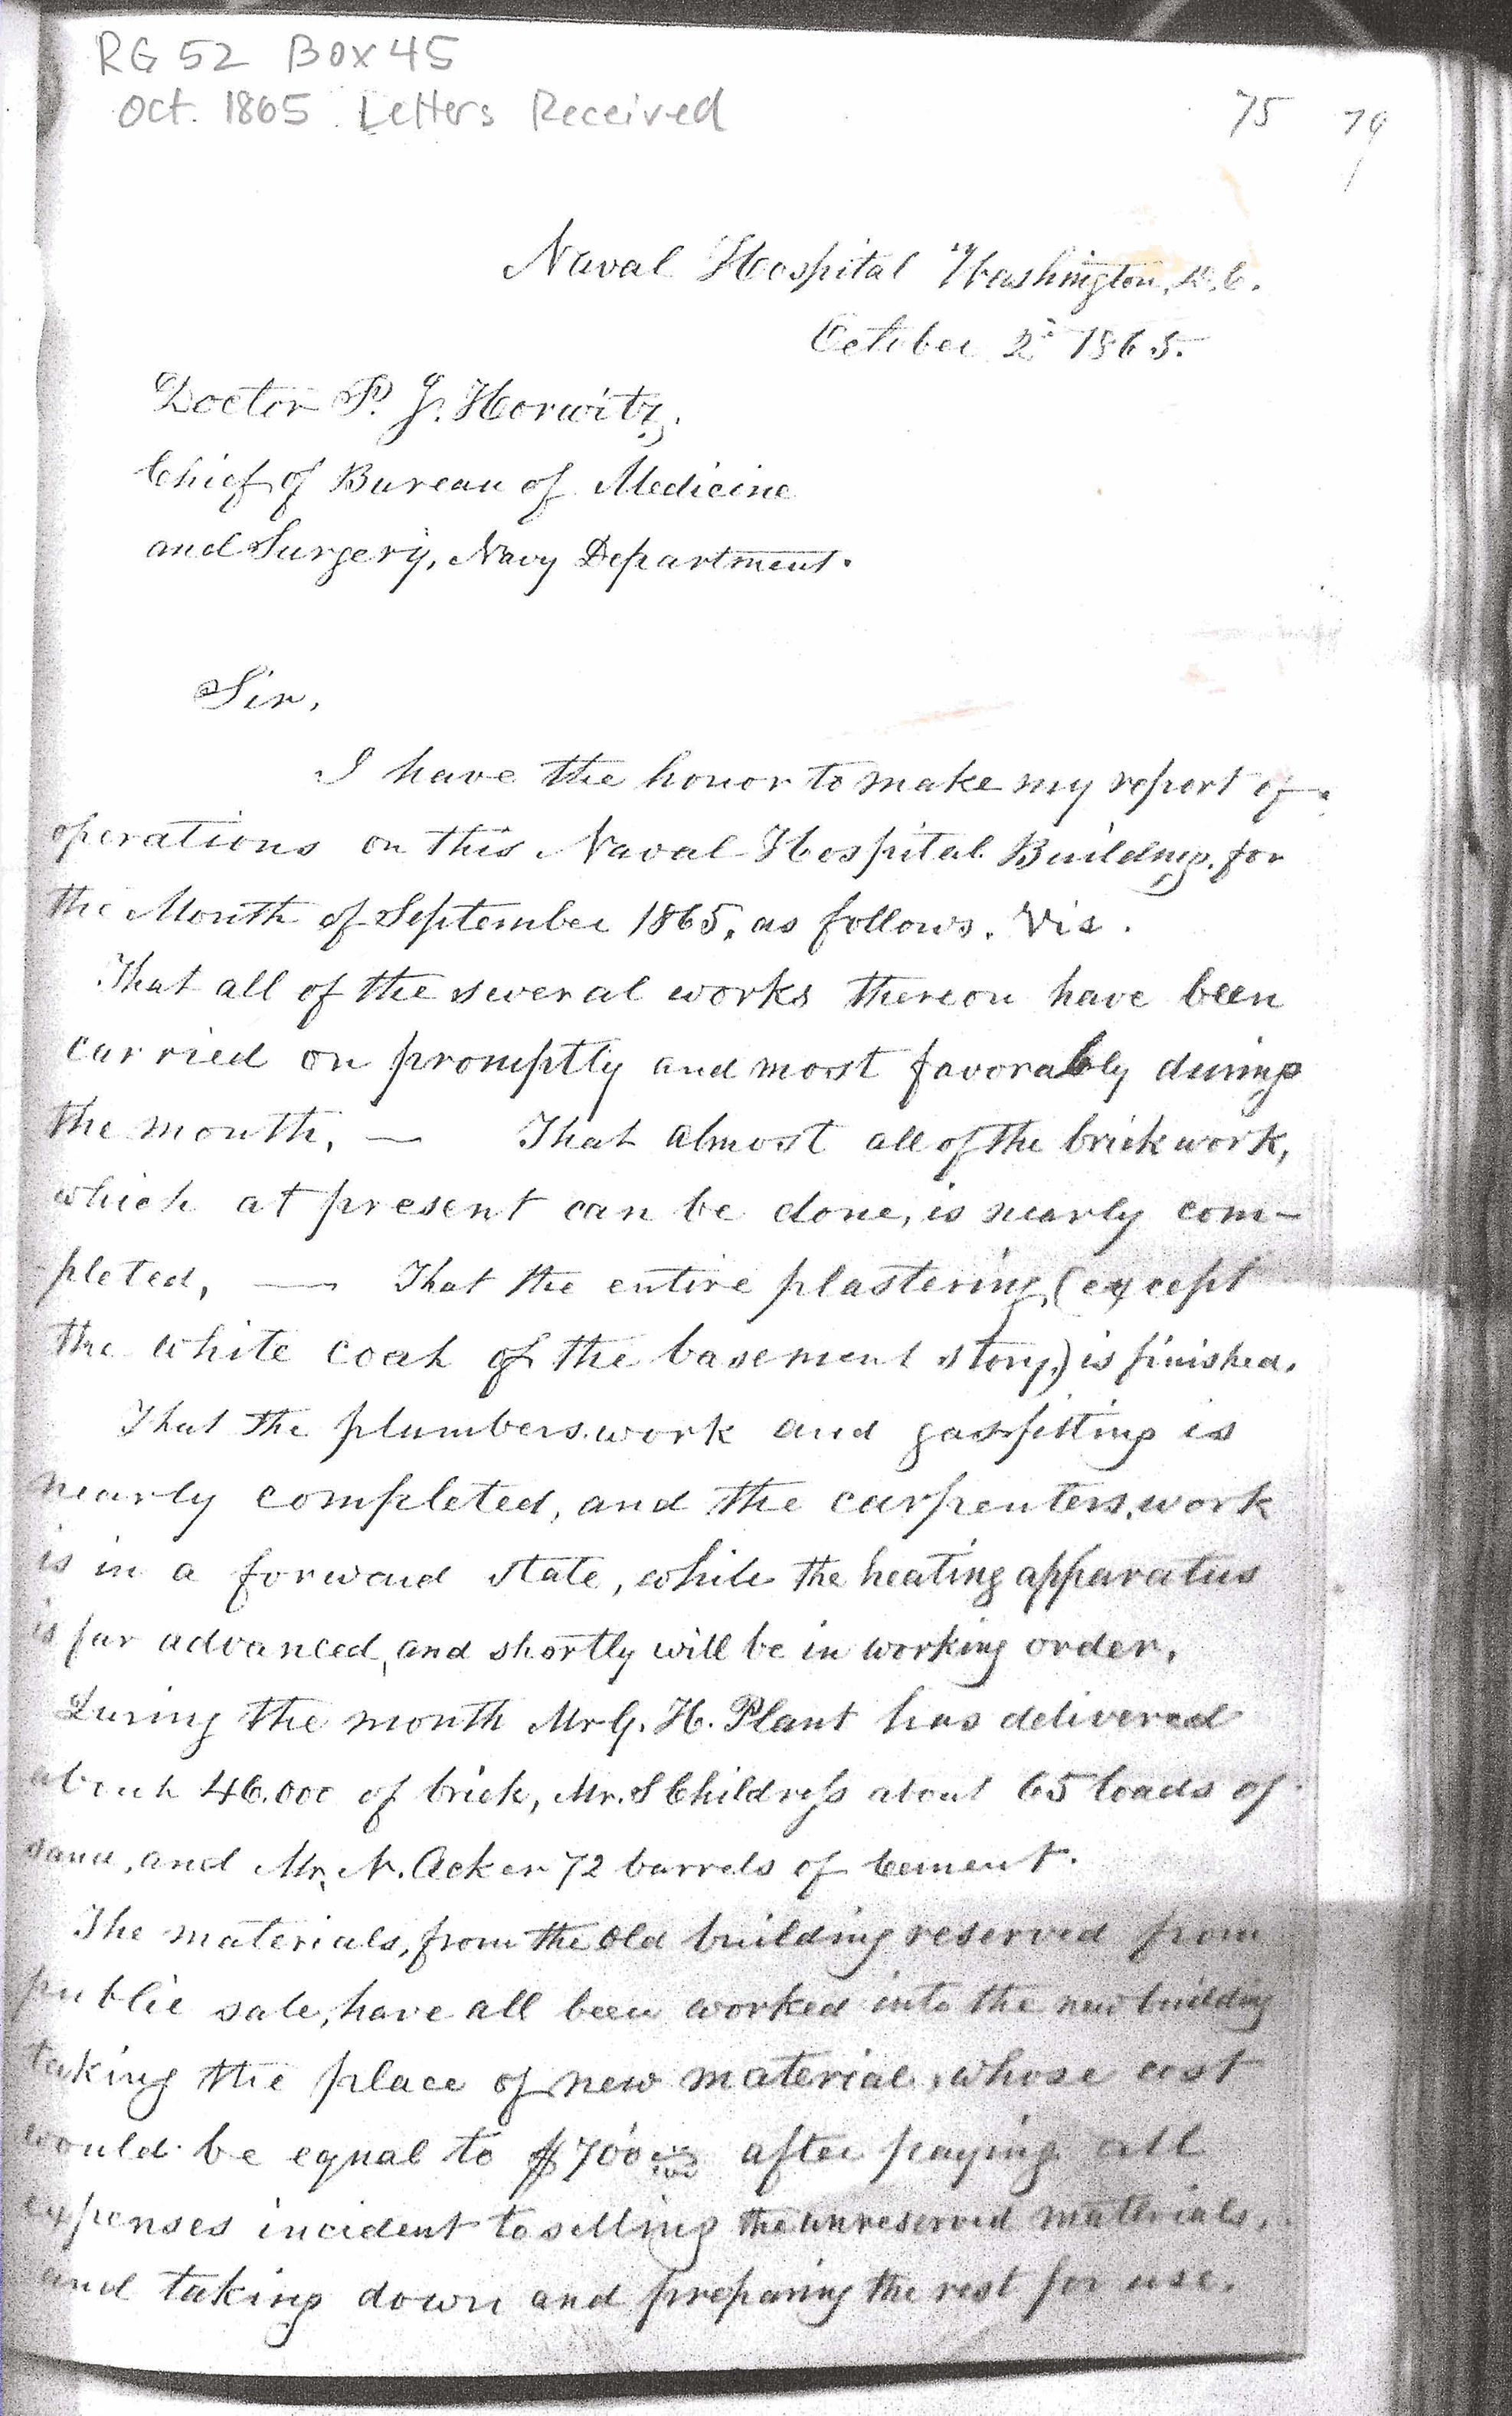 Monthly Report of the Superintendent of Construction, October 2, 1865, Page 1 of 4